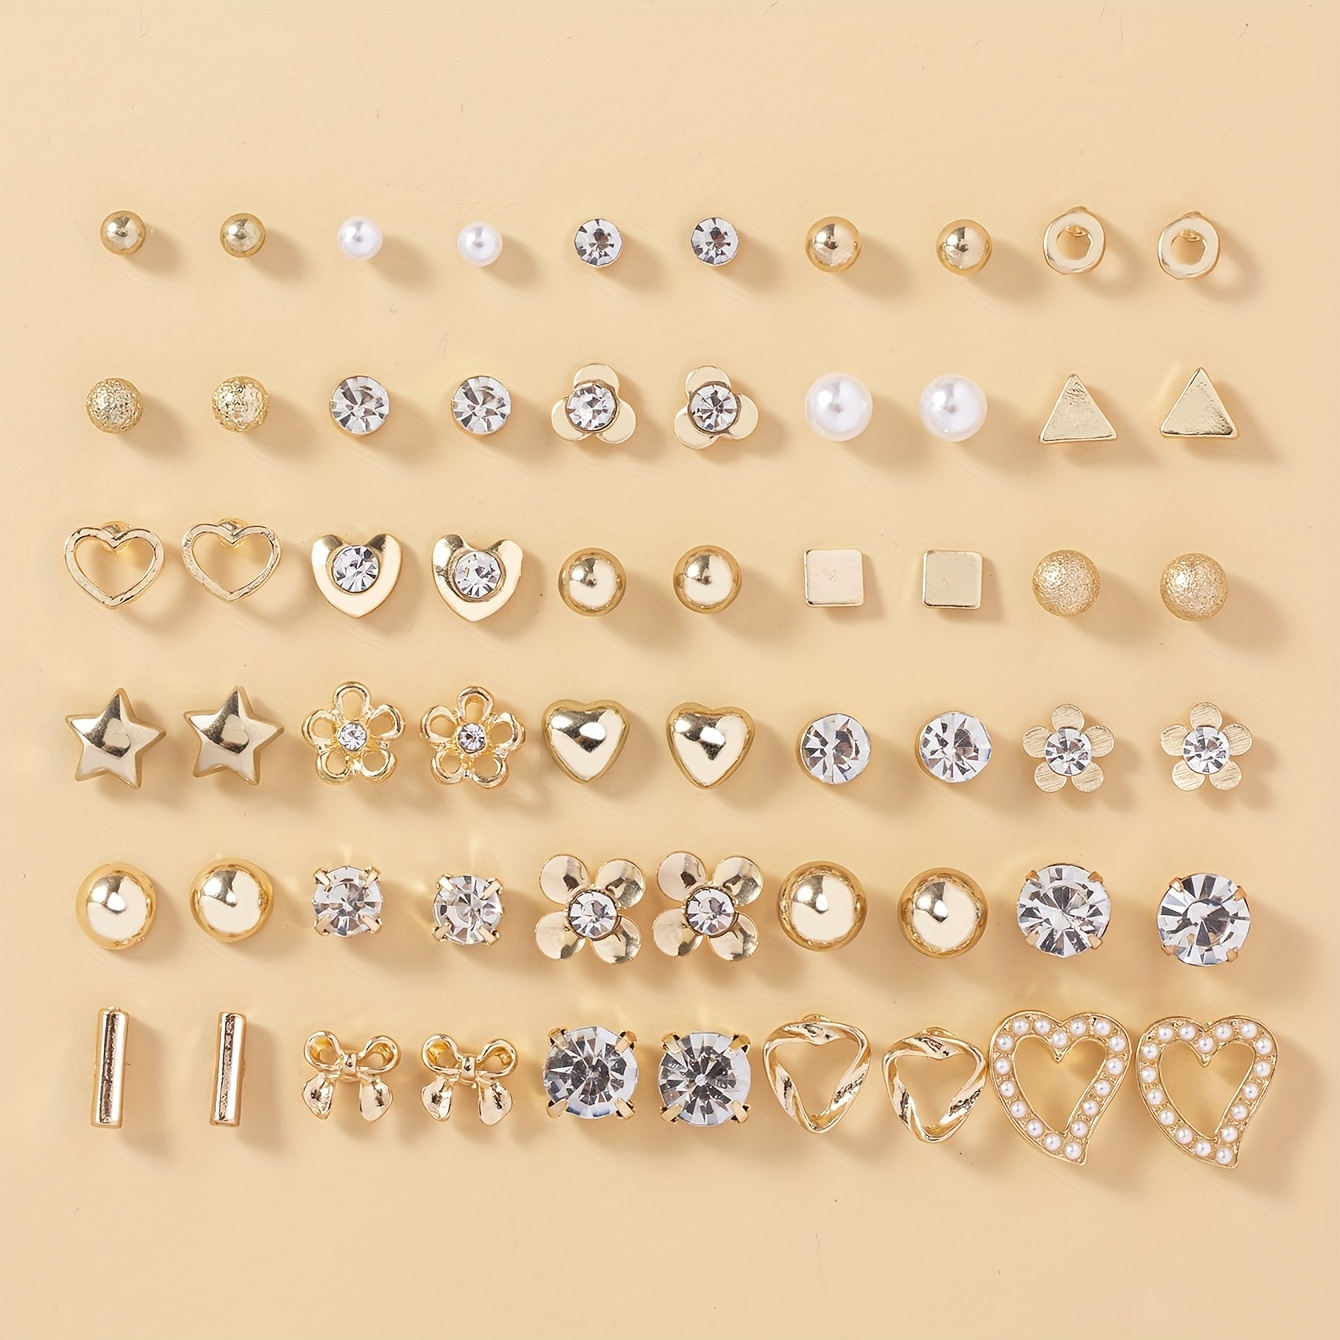 

30 Pairs Golden Stud Earrings Set With Shiny Rhinestone Faux Pearl Decor Cute Vocation Style Zinc Alloy Jewelry Daily Casual